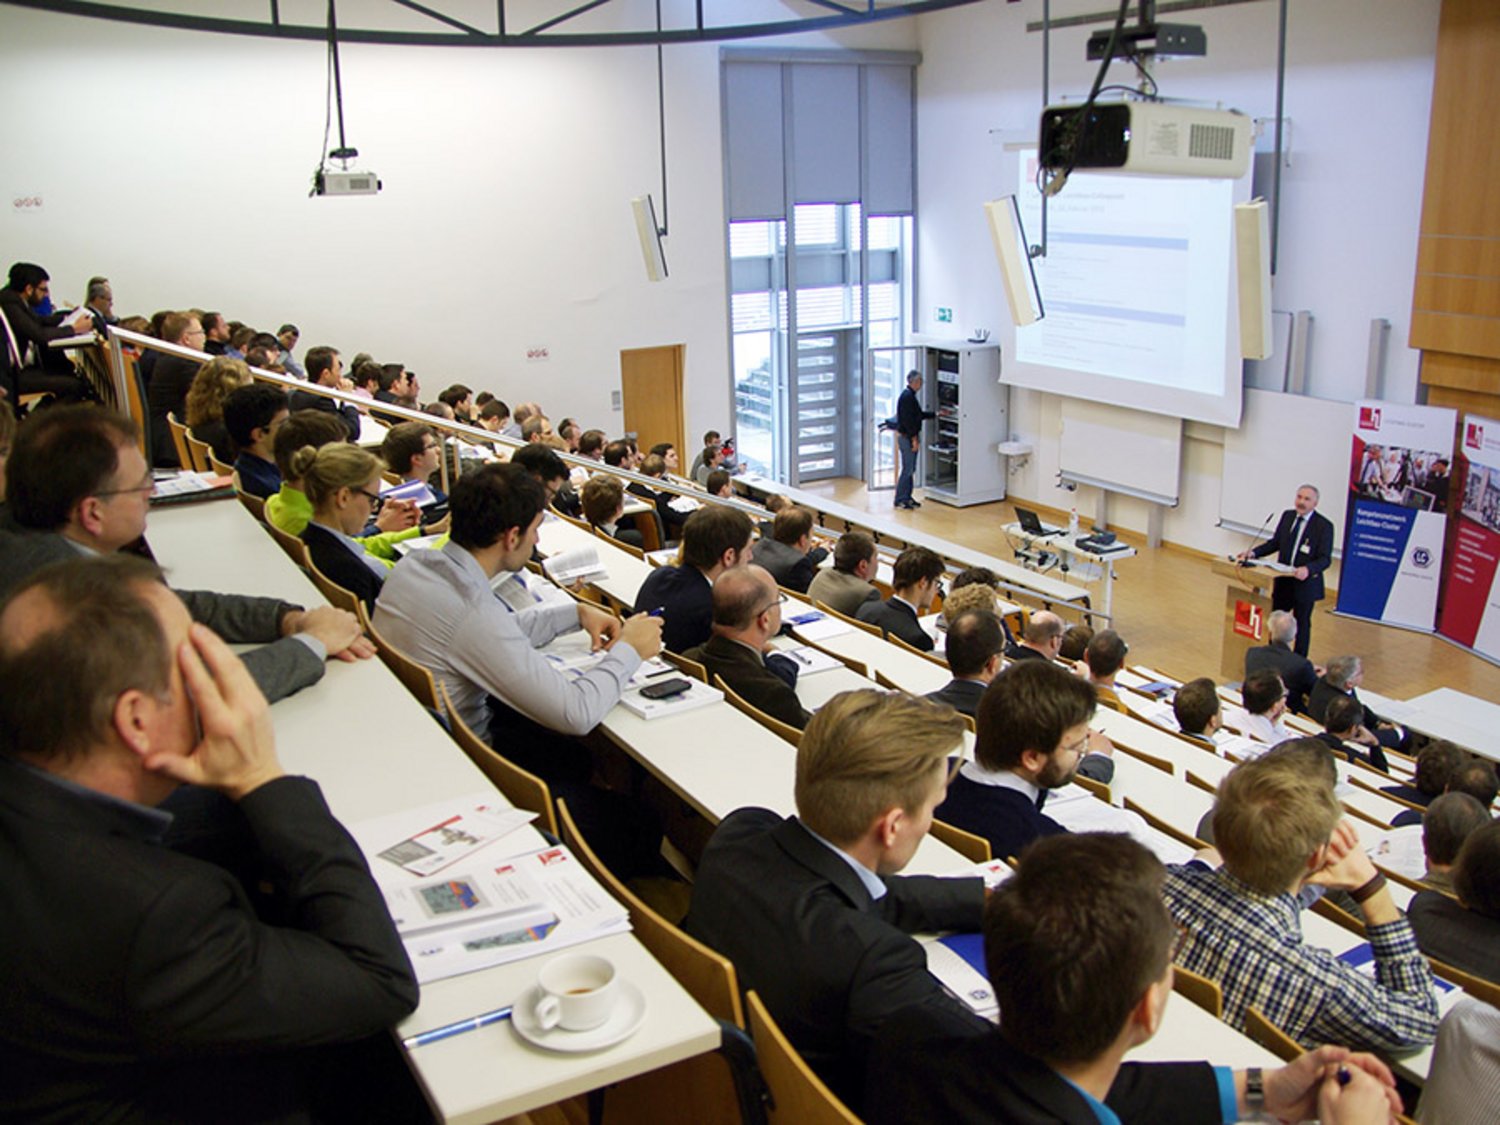 Series of events at Landshut University of Applied Sciences.